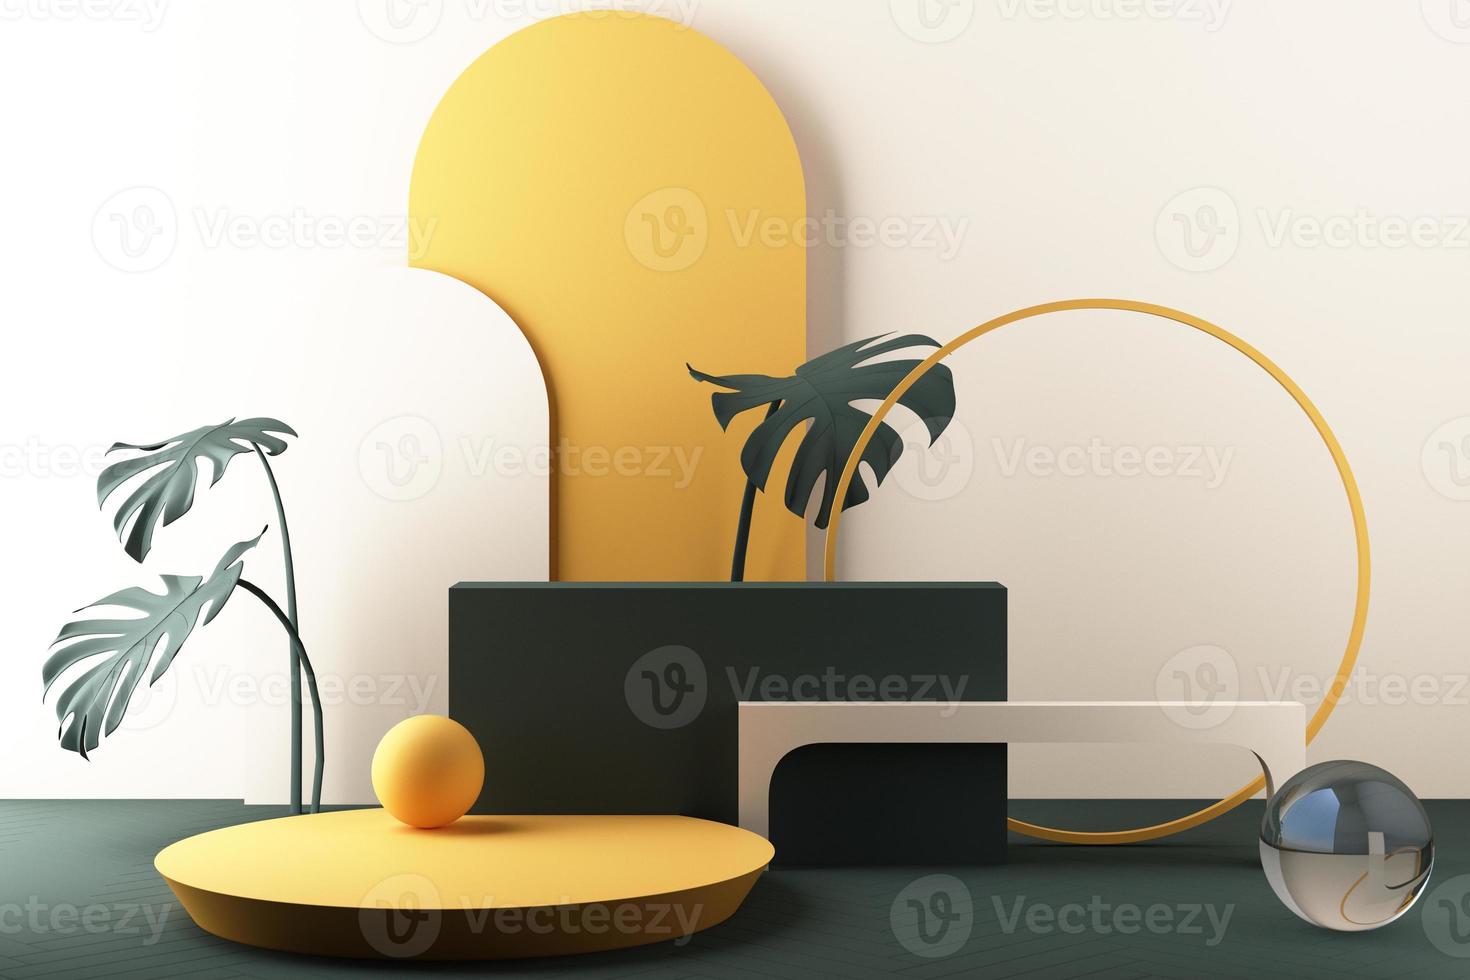 Minimal abstract geometric background with direct sunlight in shades of green and yellow. Showcase scene with empty podium for product presentation 3d rendering photo